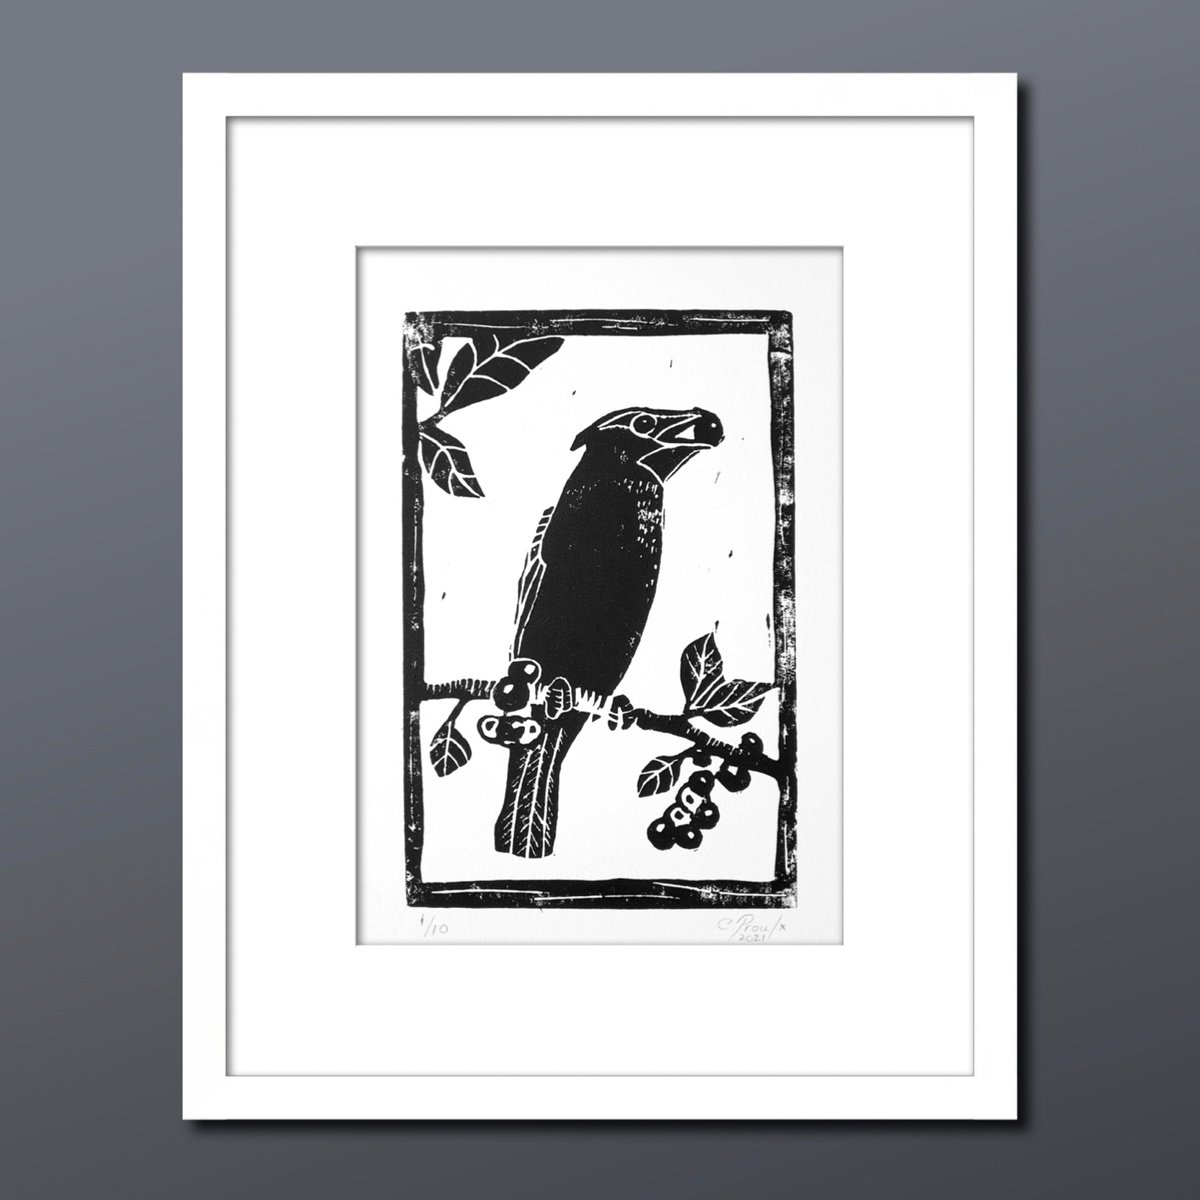 Jaseur - Small linocut print limited edition of 10 by Chantal Proulx